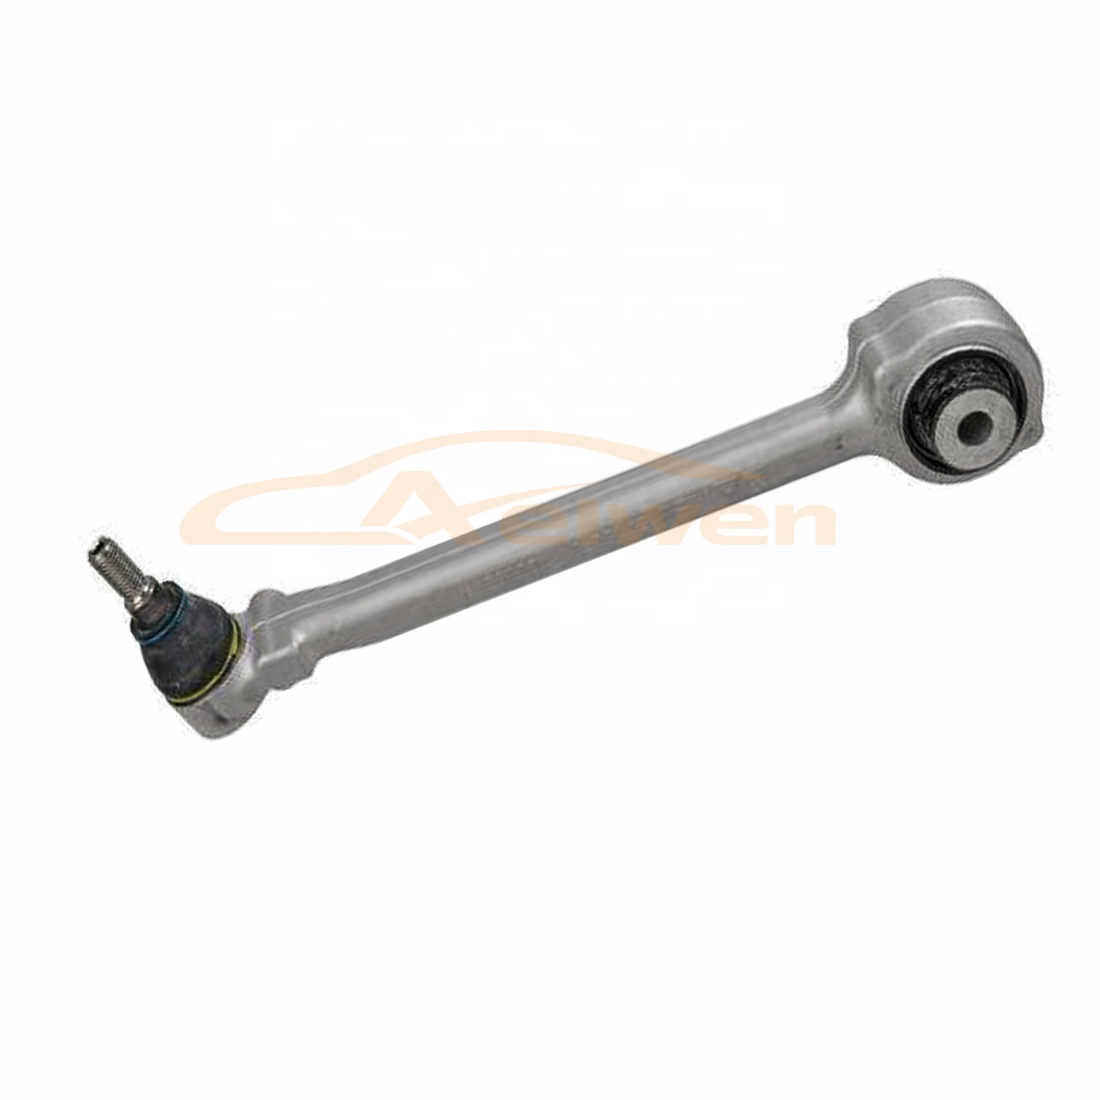 Aelwen Auto Car Adjustable Control Arm Used For Mercedes-Benz  GLK-CLASS  2043308011